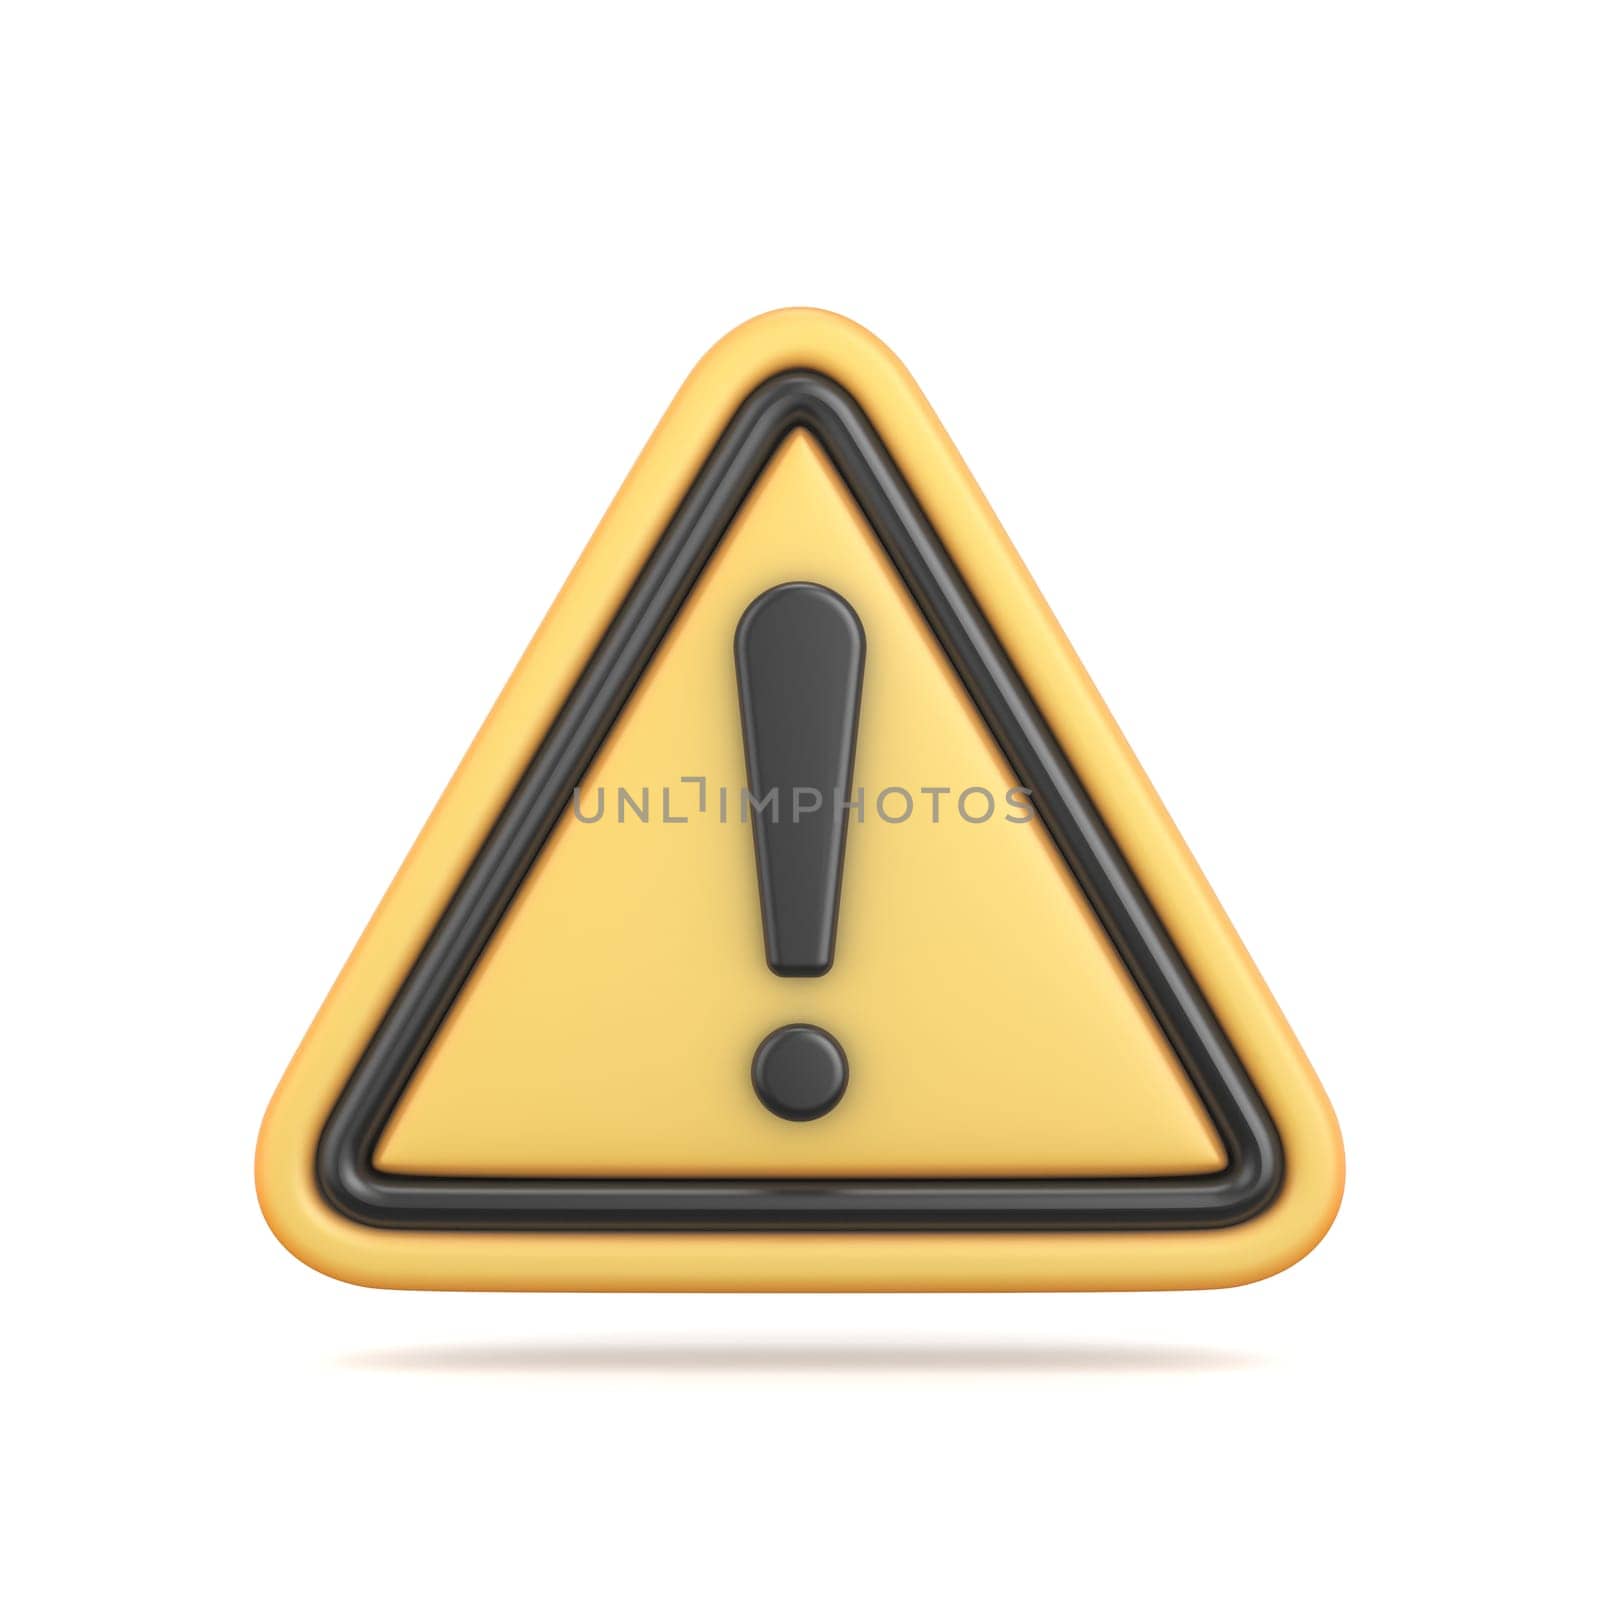 Traffic sign Yellow triangle warning sign 3D rendering illustration isolated on white background